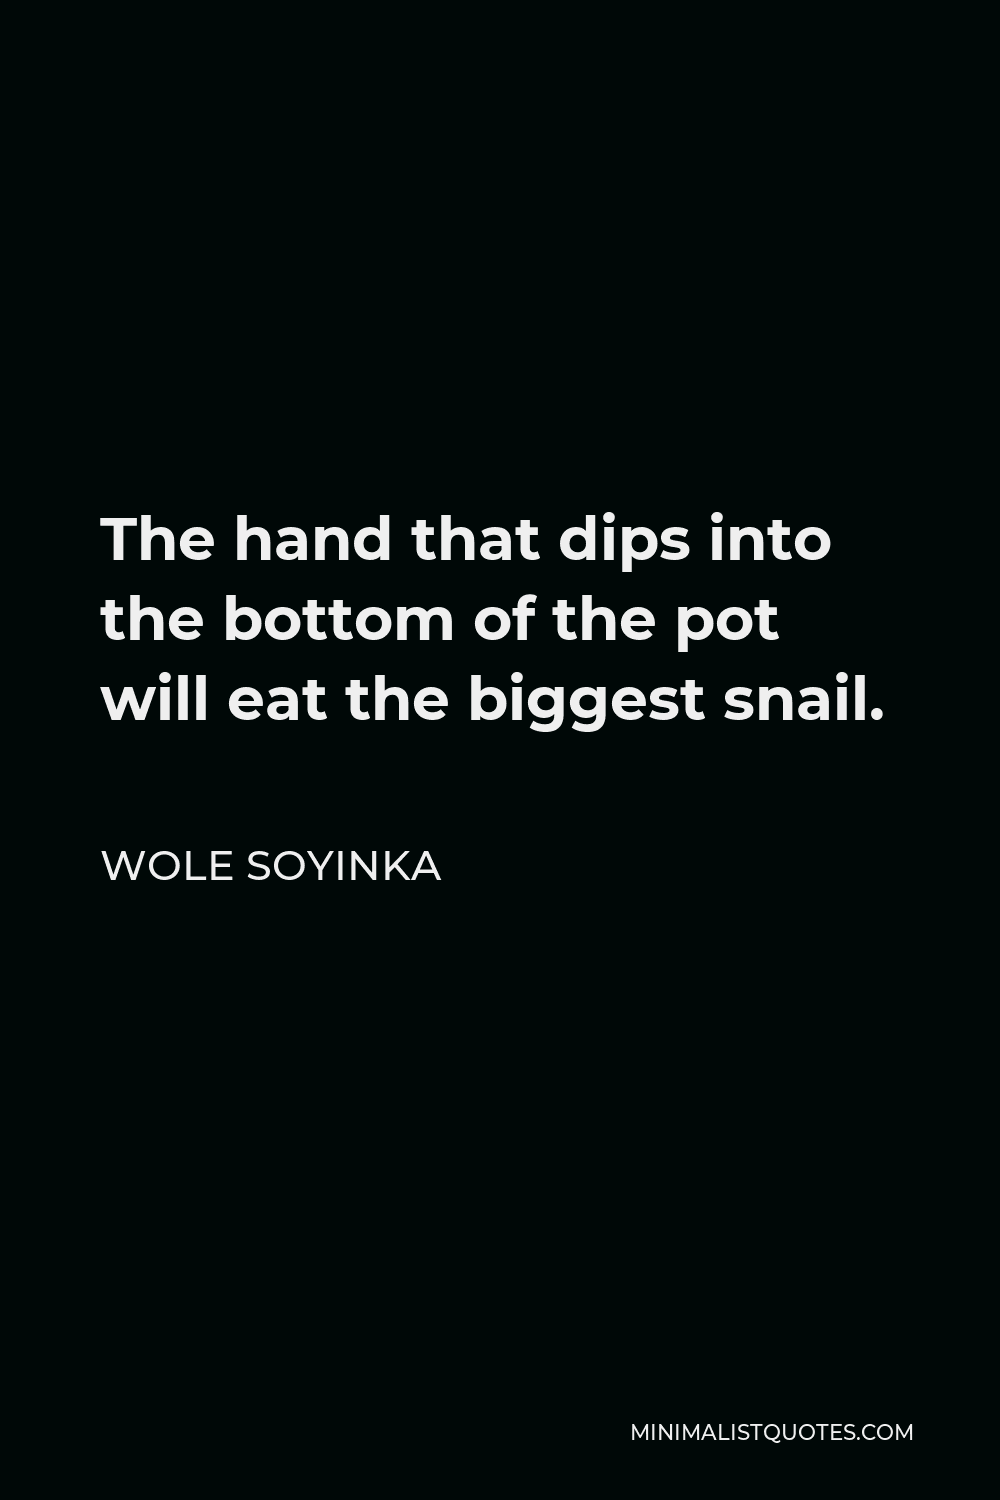 Wole Soyinka Quote - The hand that dips into the bottom of the pot will eat the biggest snail.